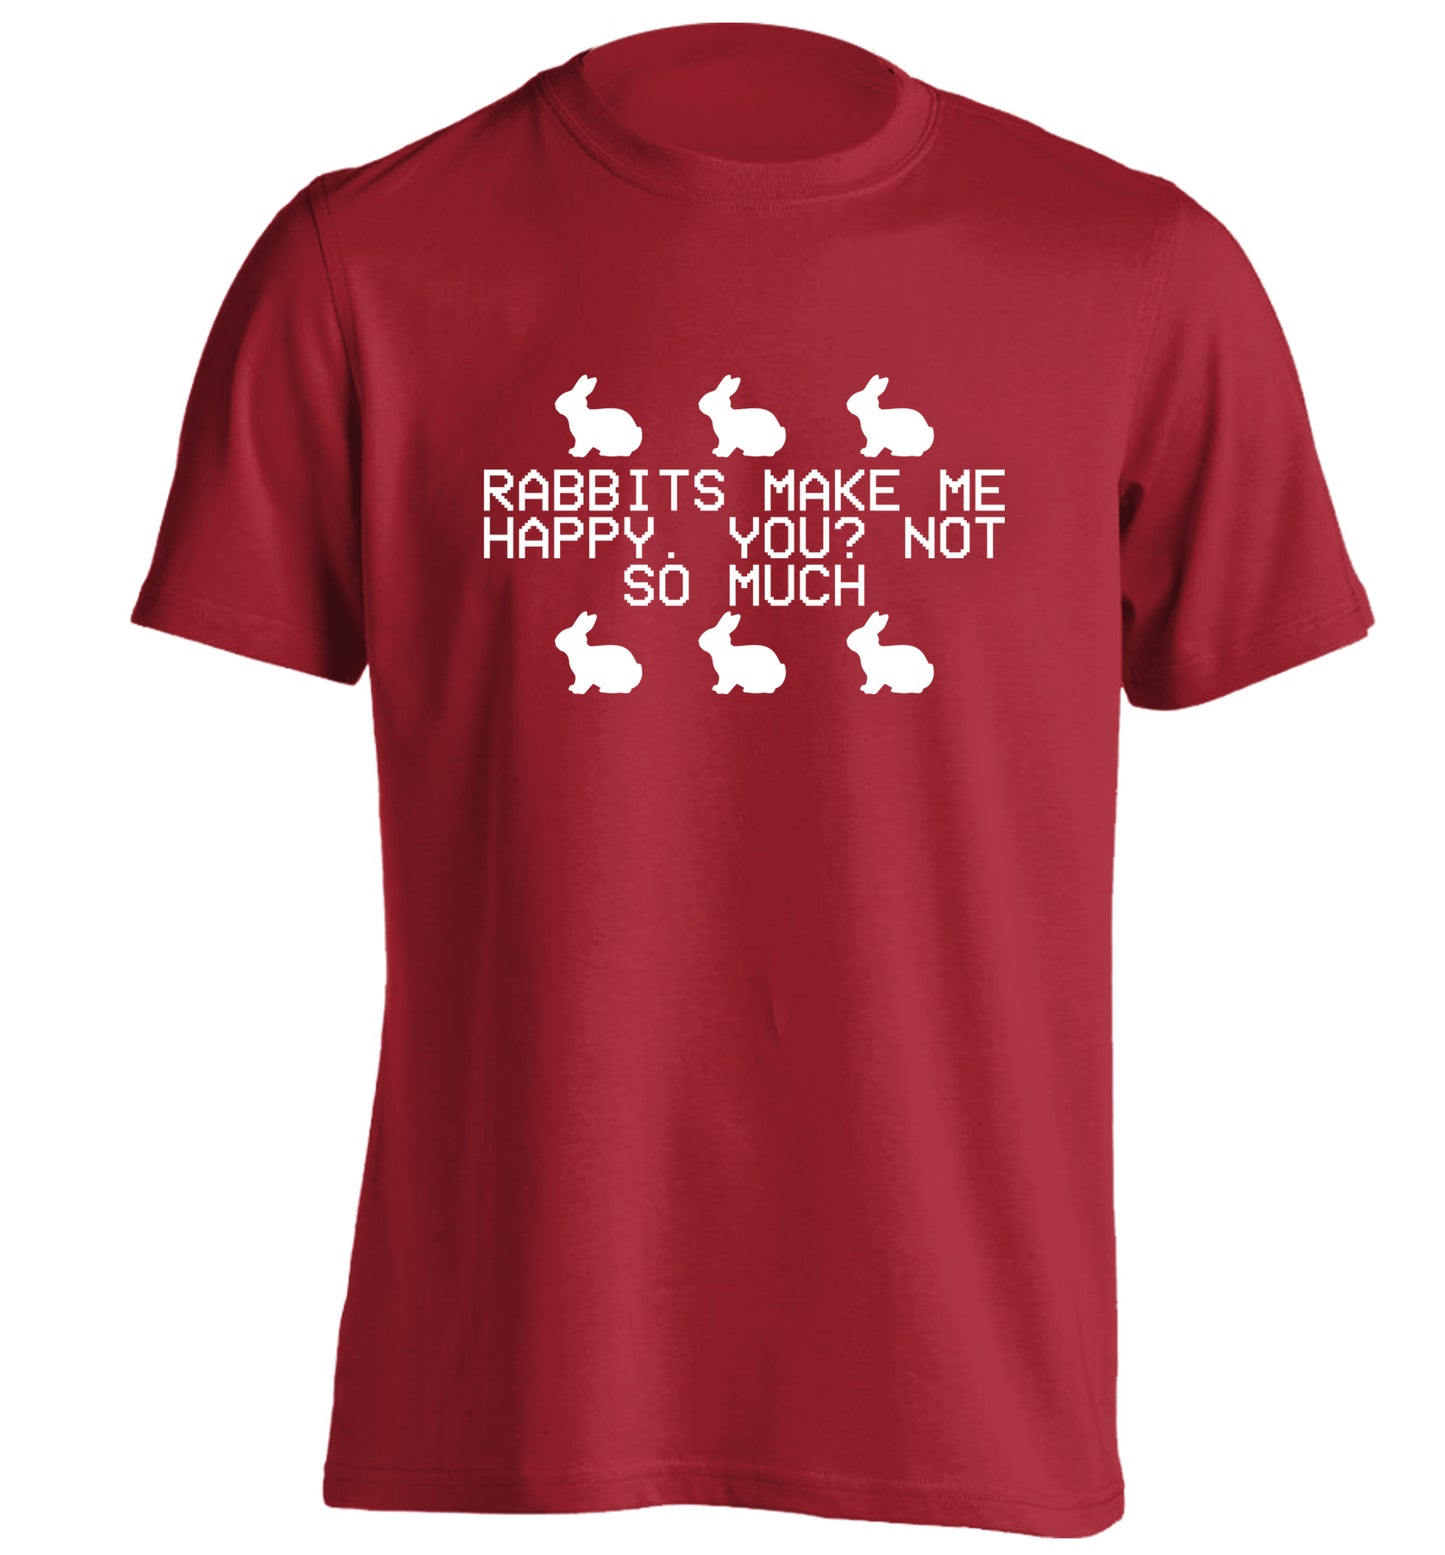 Rabbits make me happy, you not so much adults unisex red Tshirt 2XL